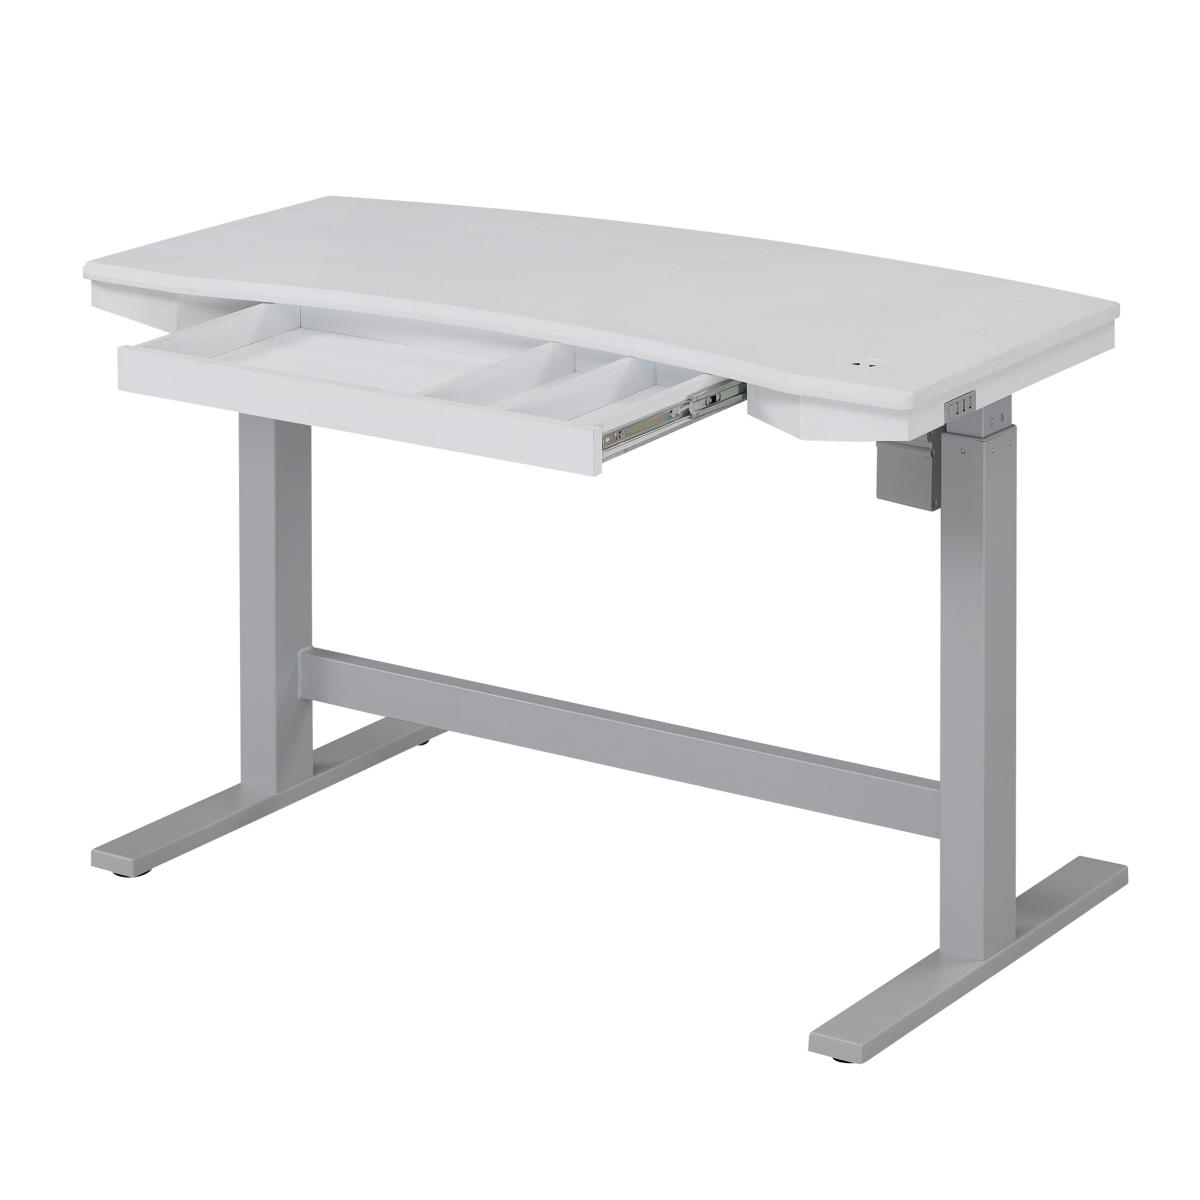 Electric Adjustable Height Desk with Charging Station, Brushed